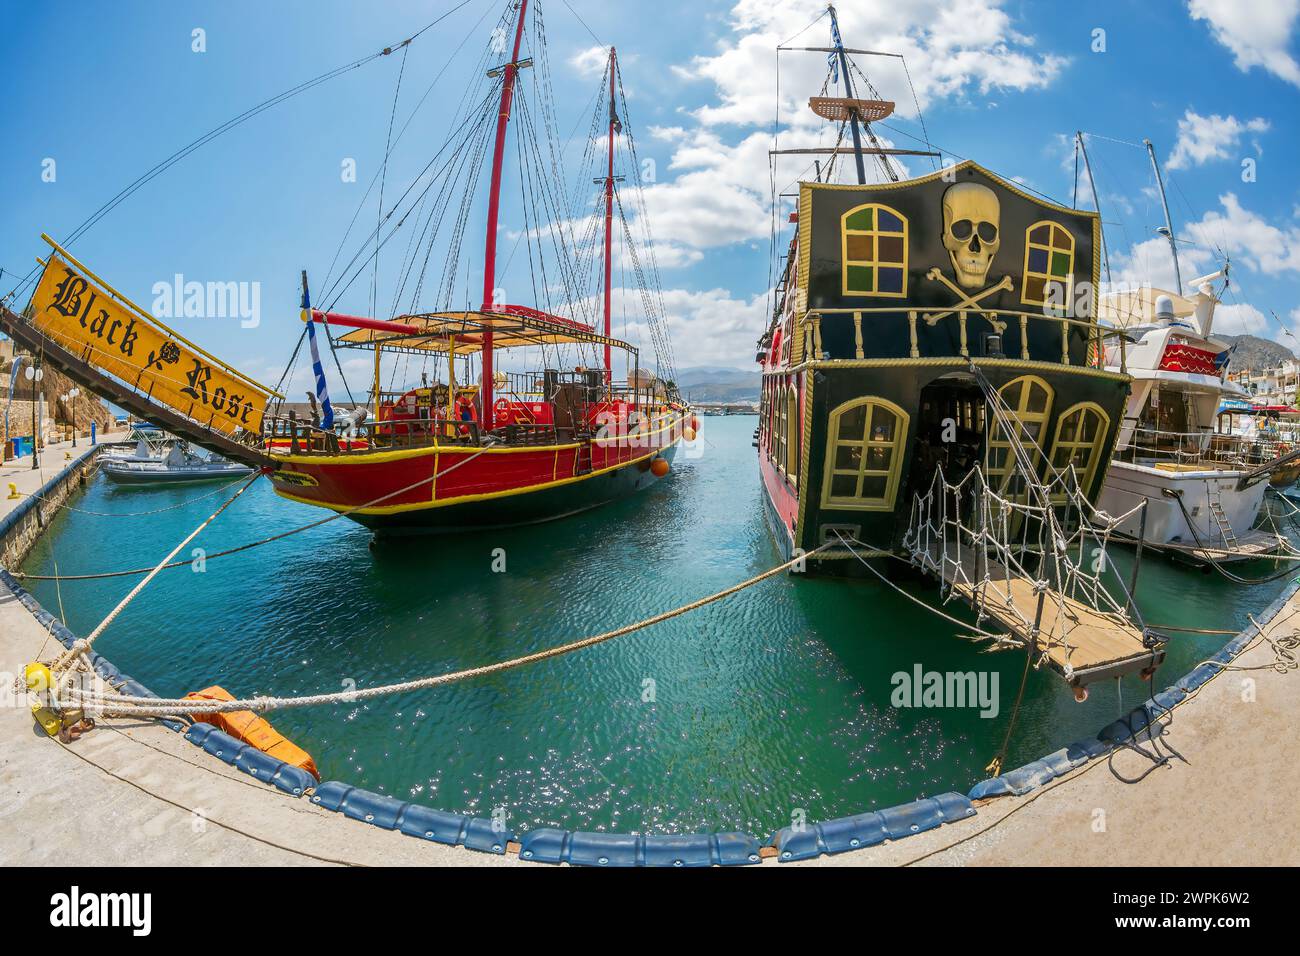 Hersonissos, Crete, Greece - July 23, 2021: Tourist ships imitating pirate ships in the port of the city. Stock Photo